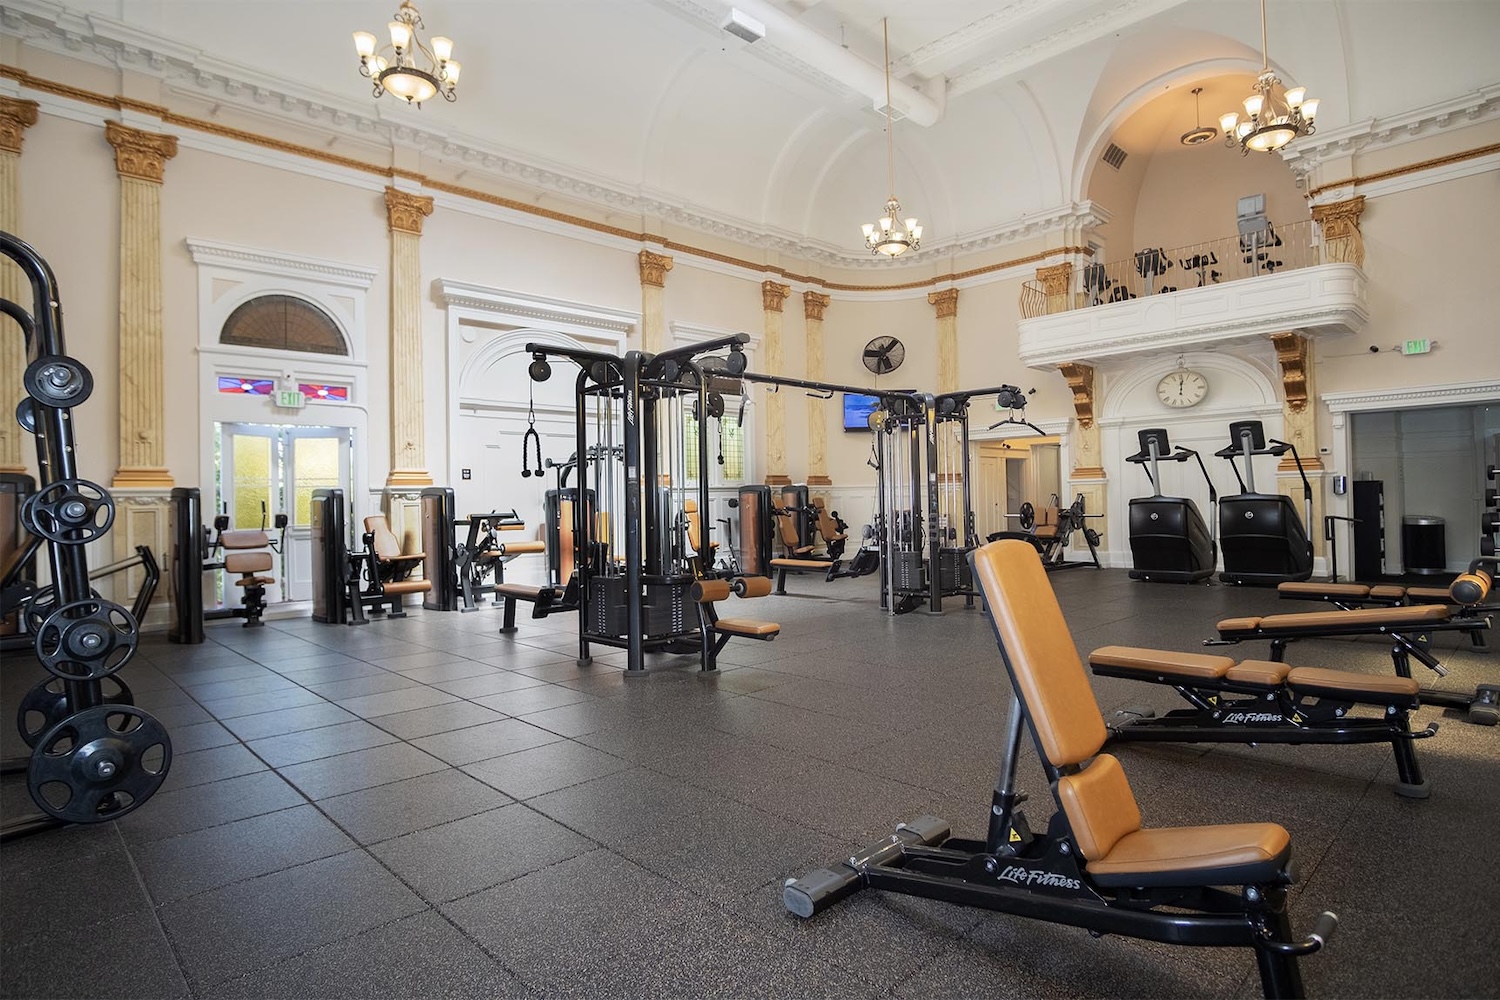 gym equipment, lamps hanging, terraces, columns, and old architecture 